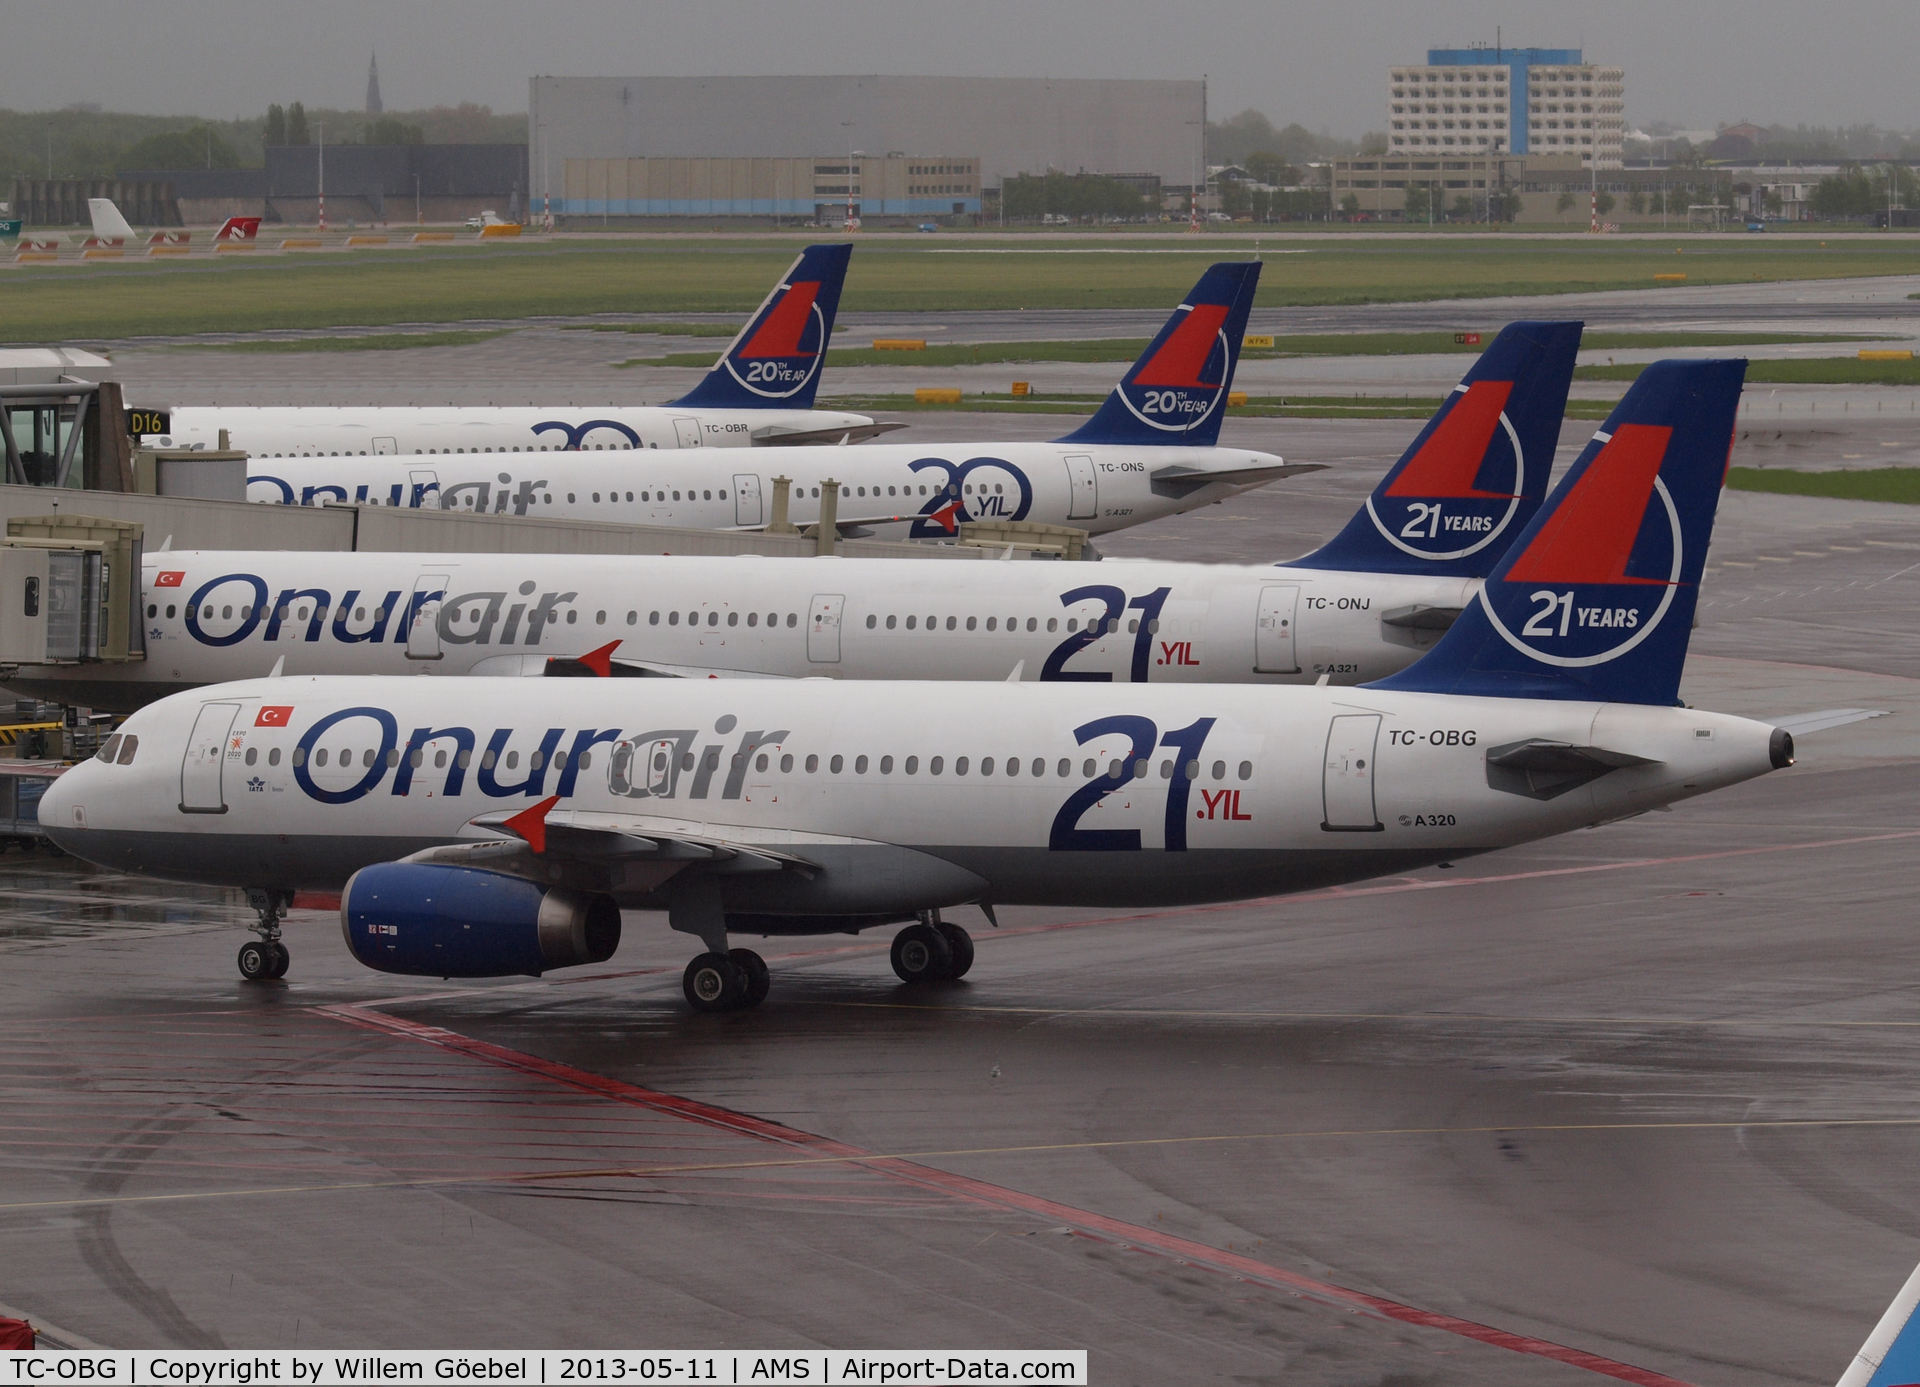 TC-OBG, 1996 Airbus A320-233 C/N 916, A part of ONUR AIR fleet with new numbers 21 and old number 20